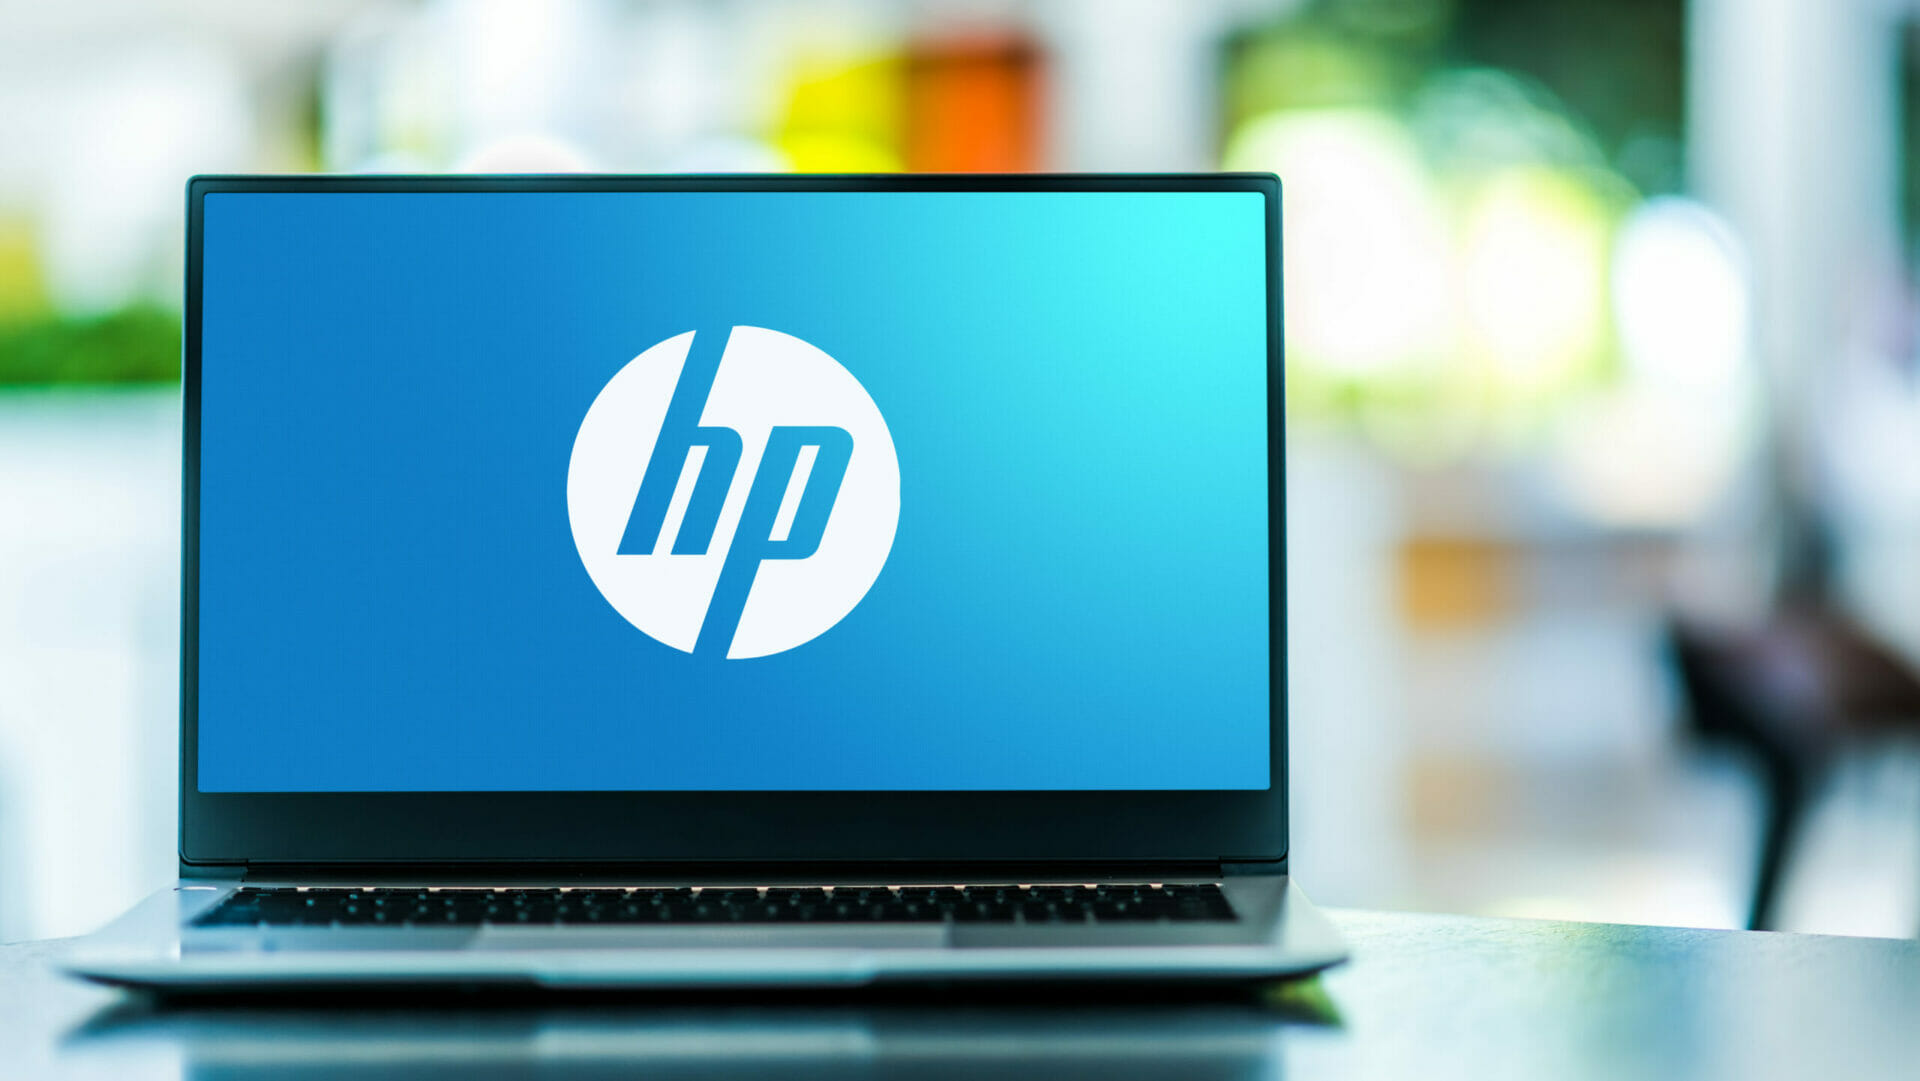 Laptop with an image of HP